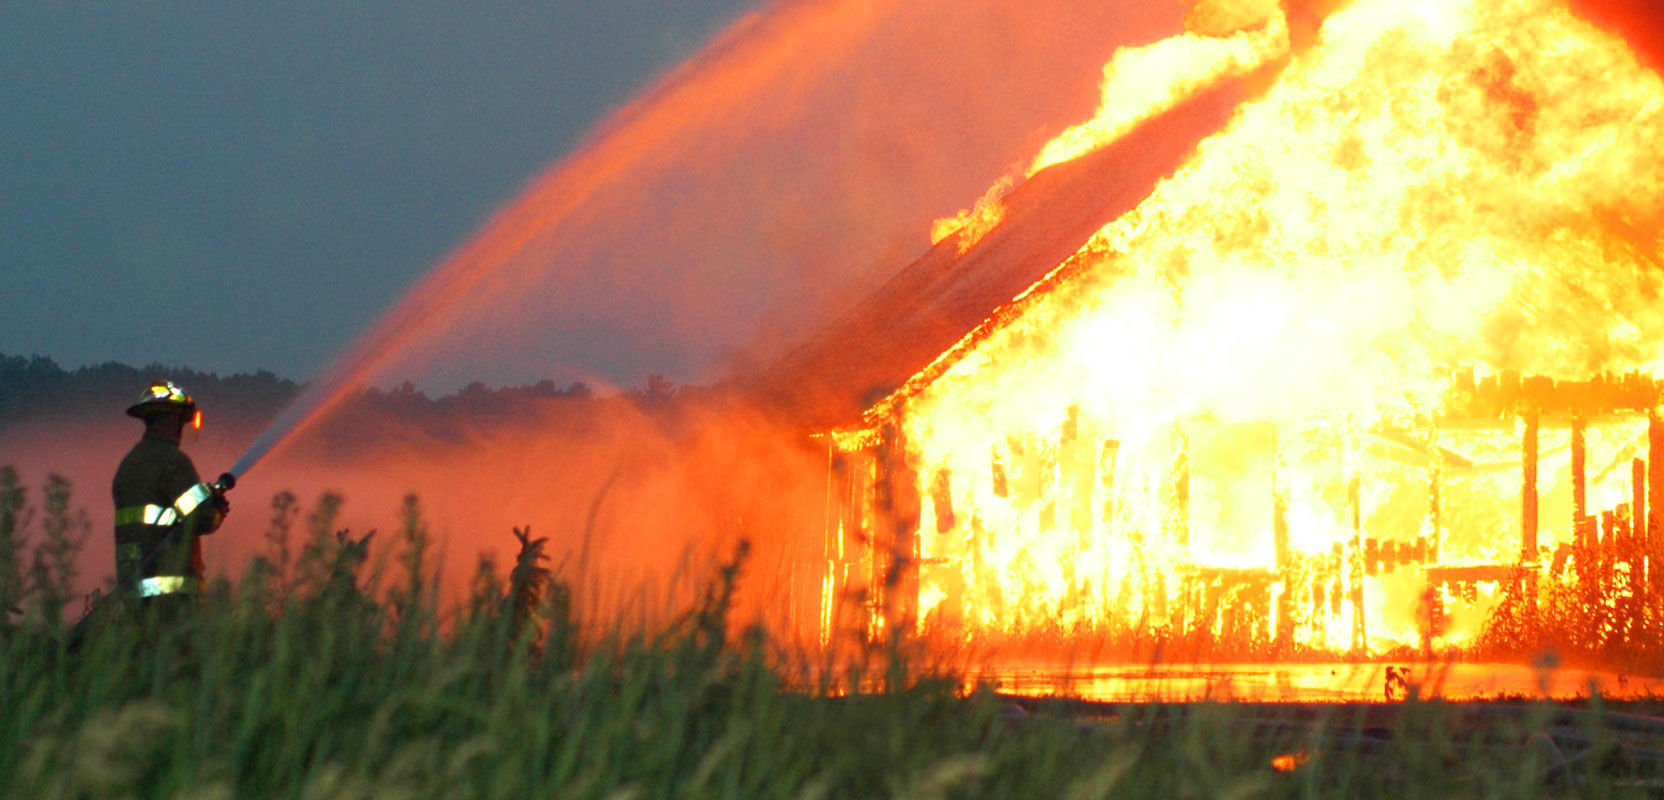 Firefighter putting out house on fire